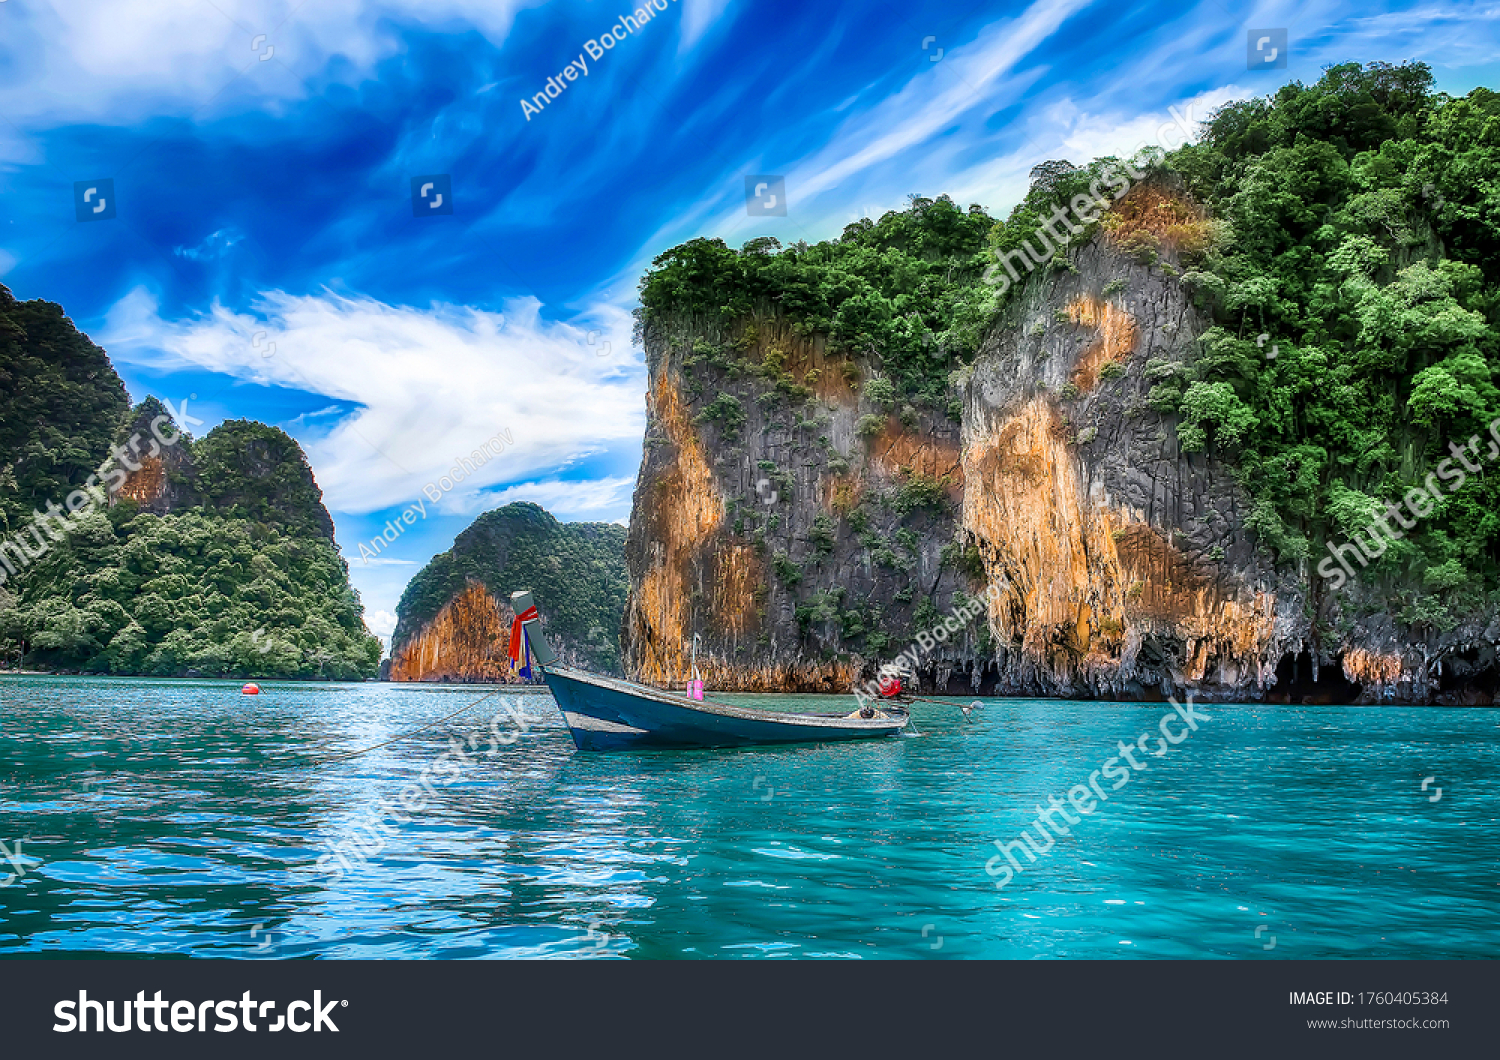 Boat in calm water of Phuket island bay in relaxing travel landscape #1760405384